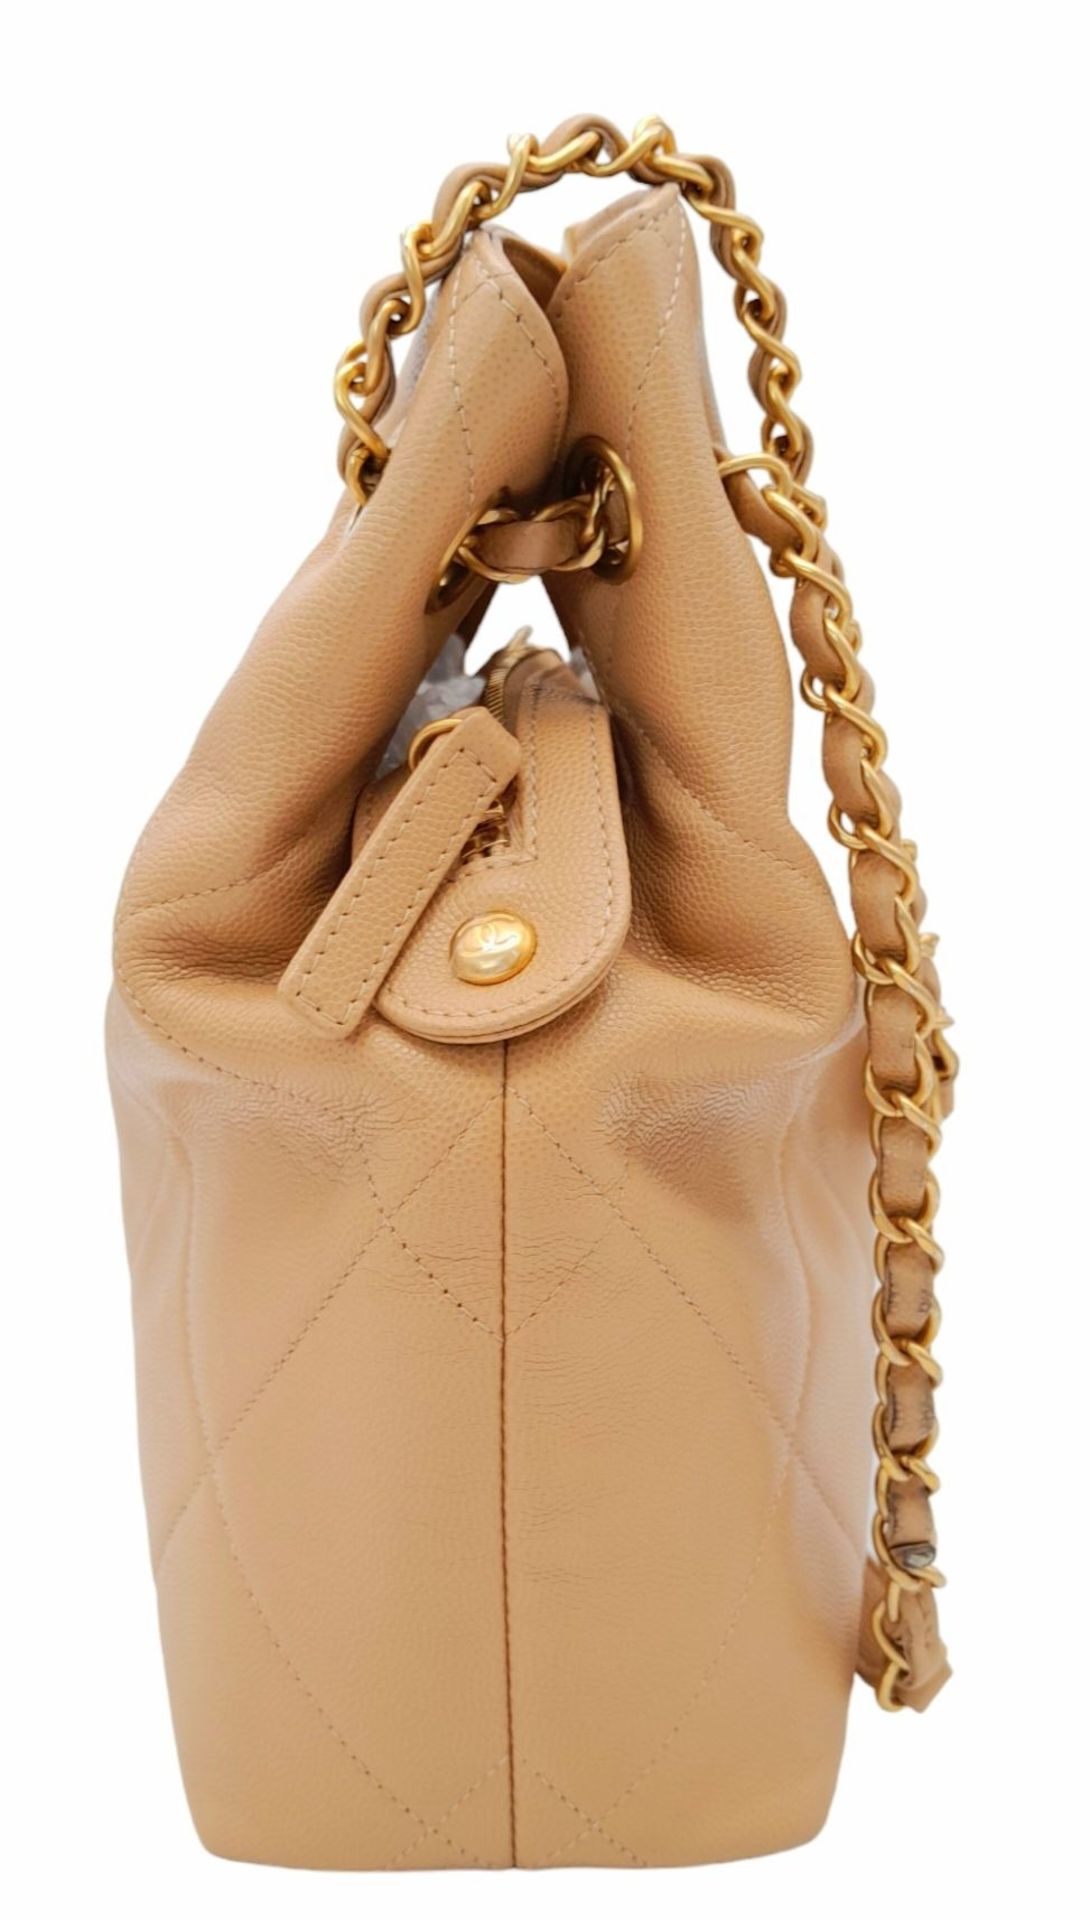 A Chanel Two-Way Chain Shoulder Bag. Beige caviar leather. Gold tone hardware. Spacious interior - Image 4 of 13